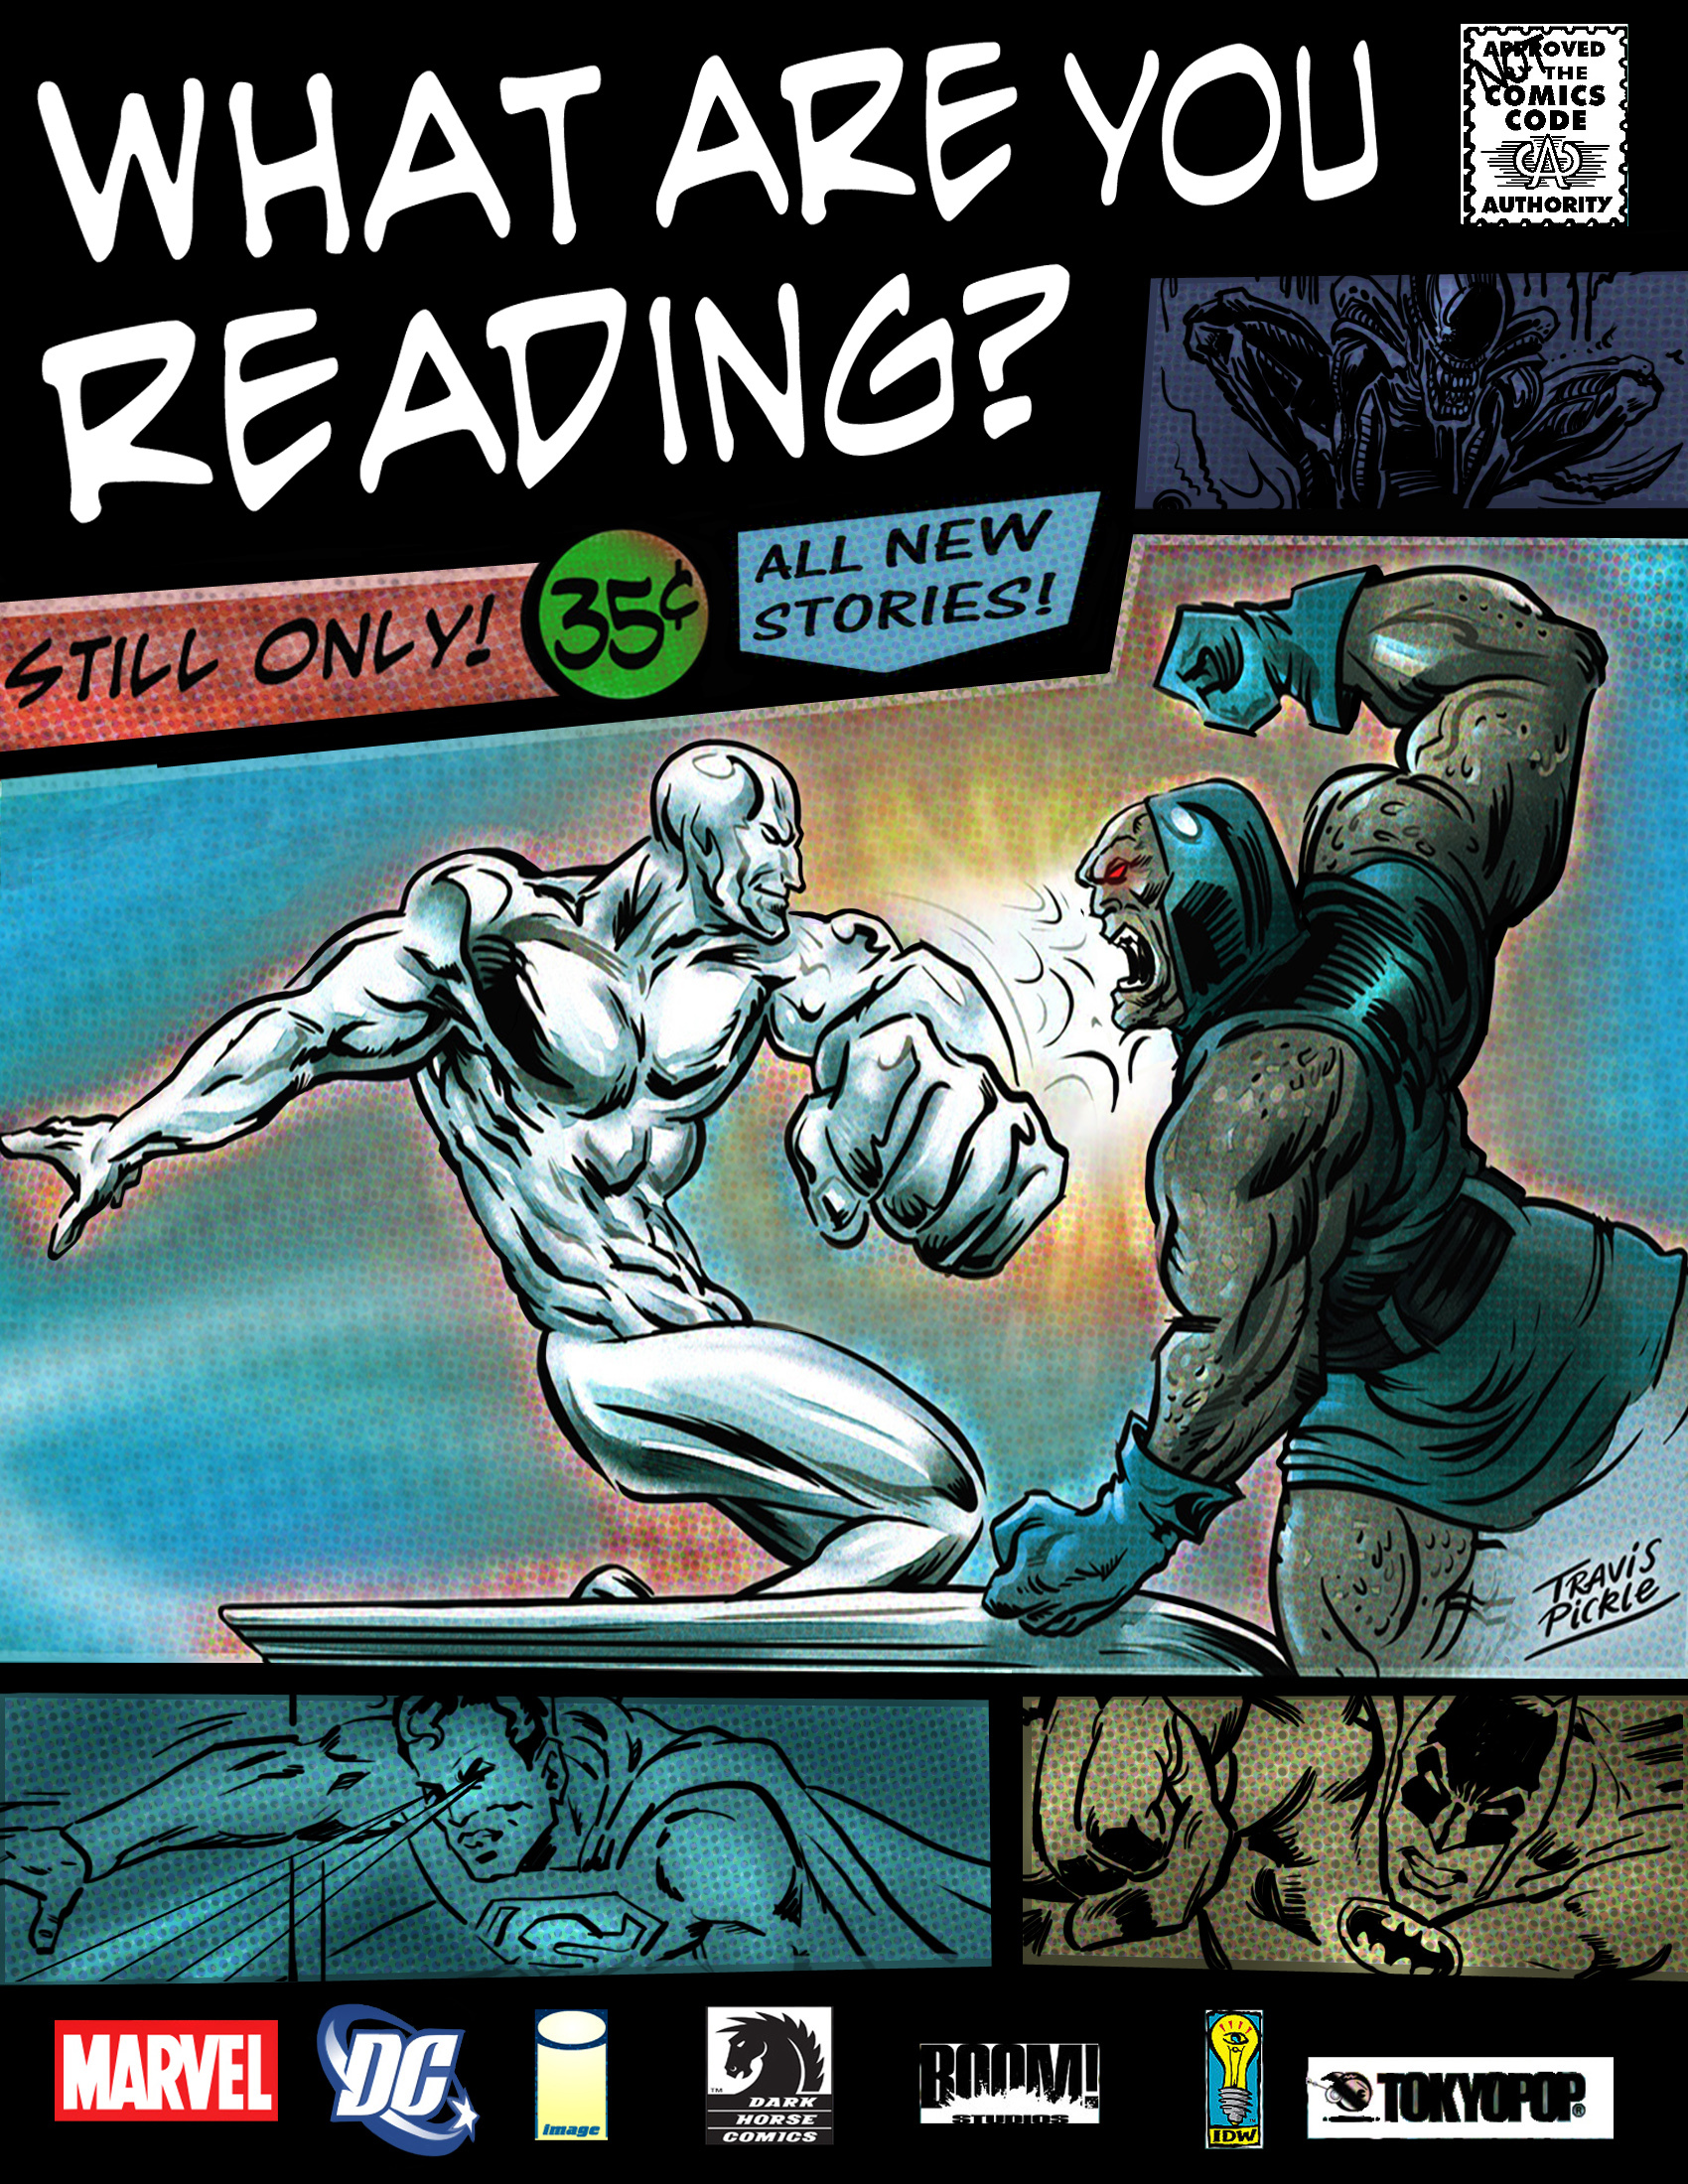 What Are You Reading? Volume 8 Issue 3